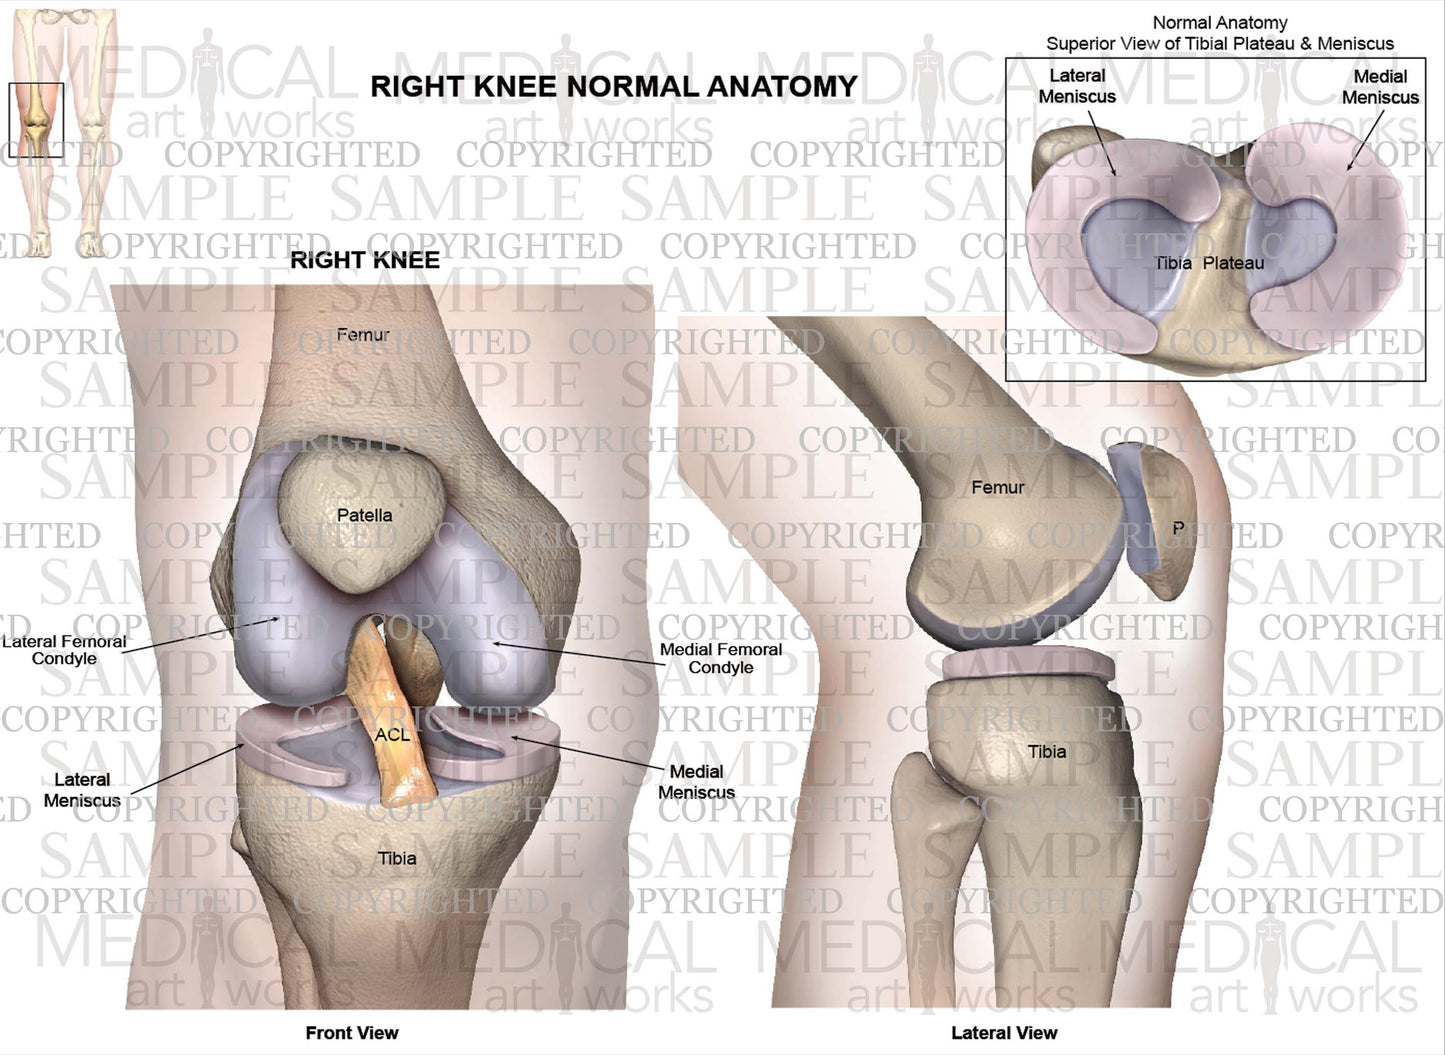 Normal Right Knee Anatomy & Meniscus - Different views